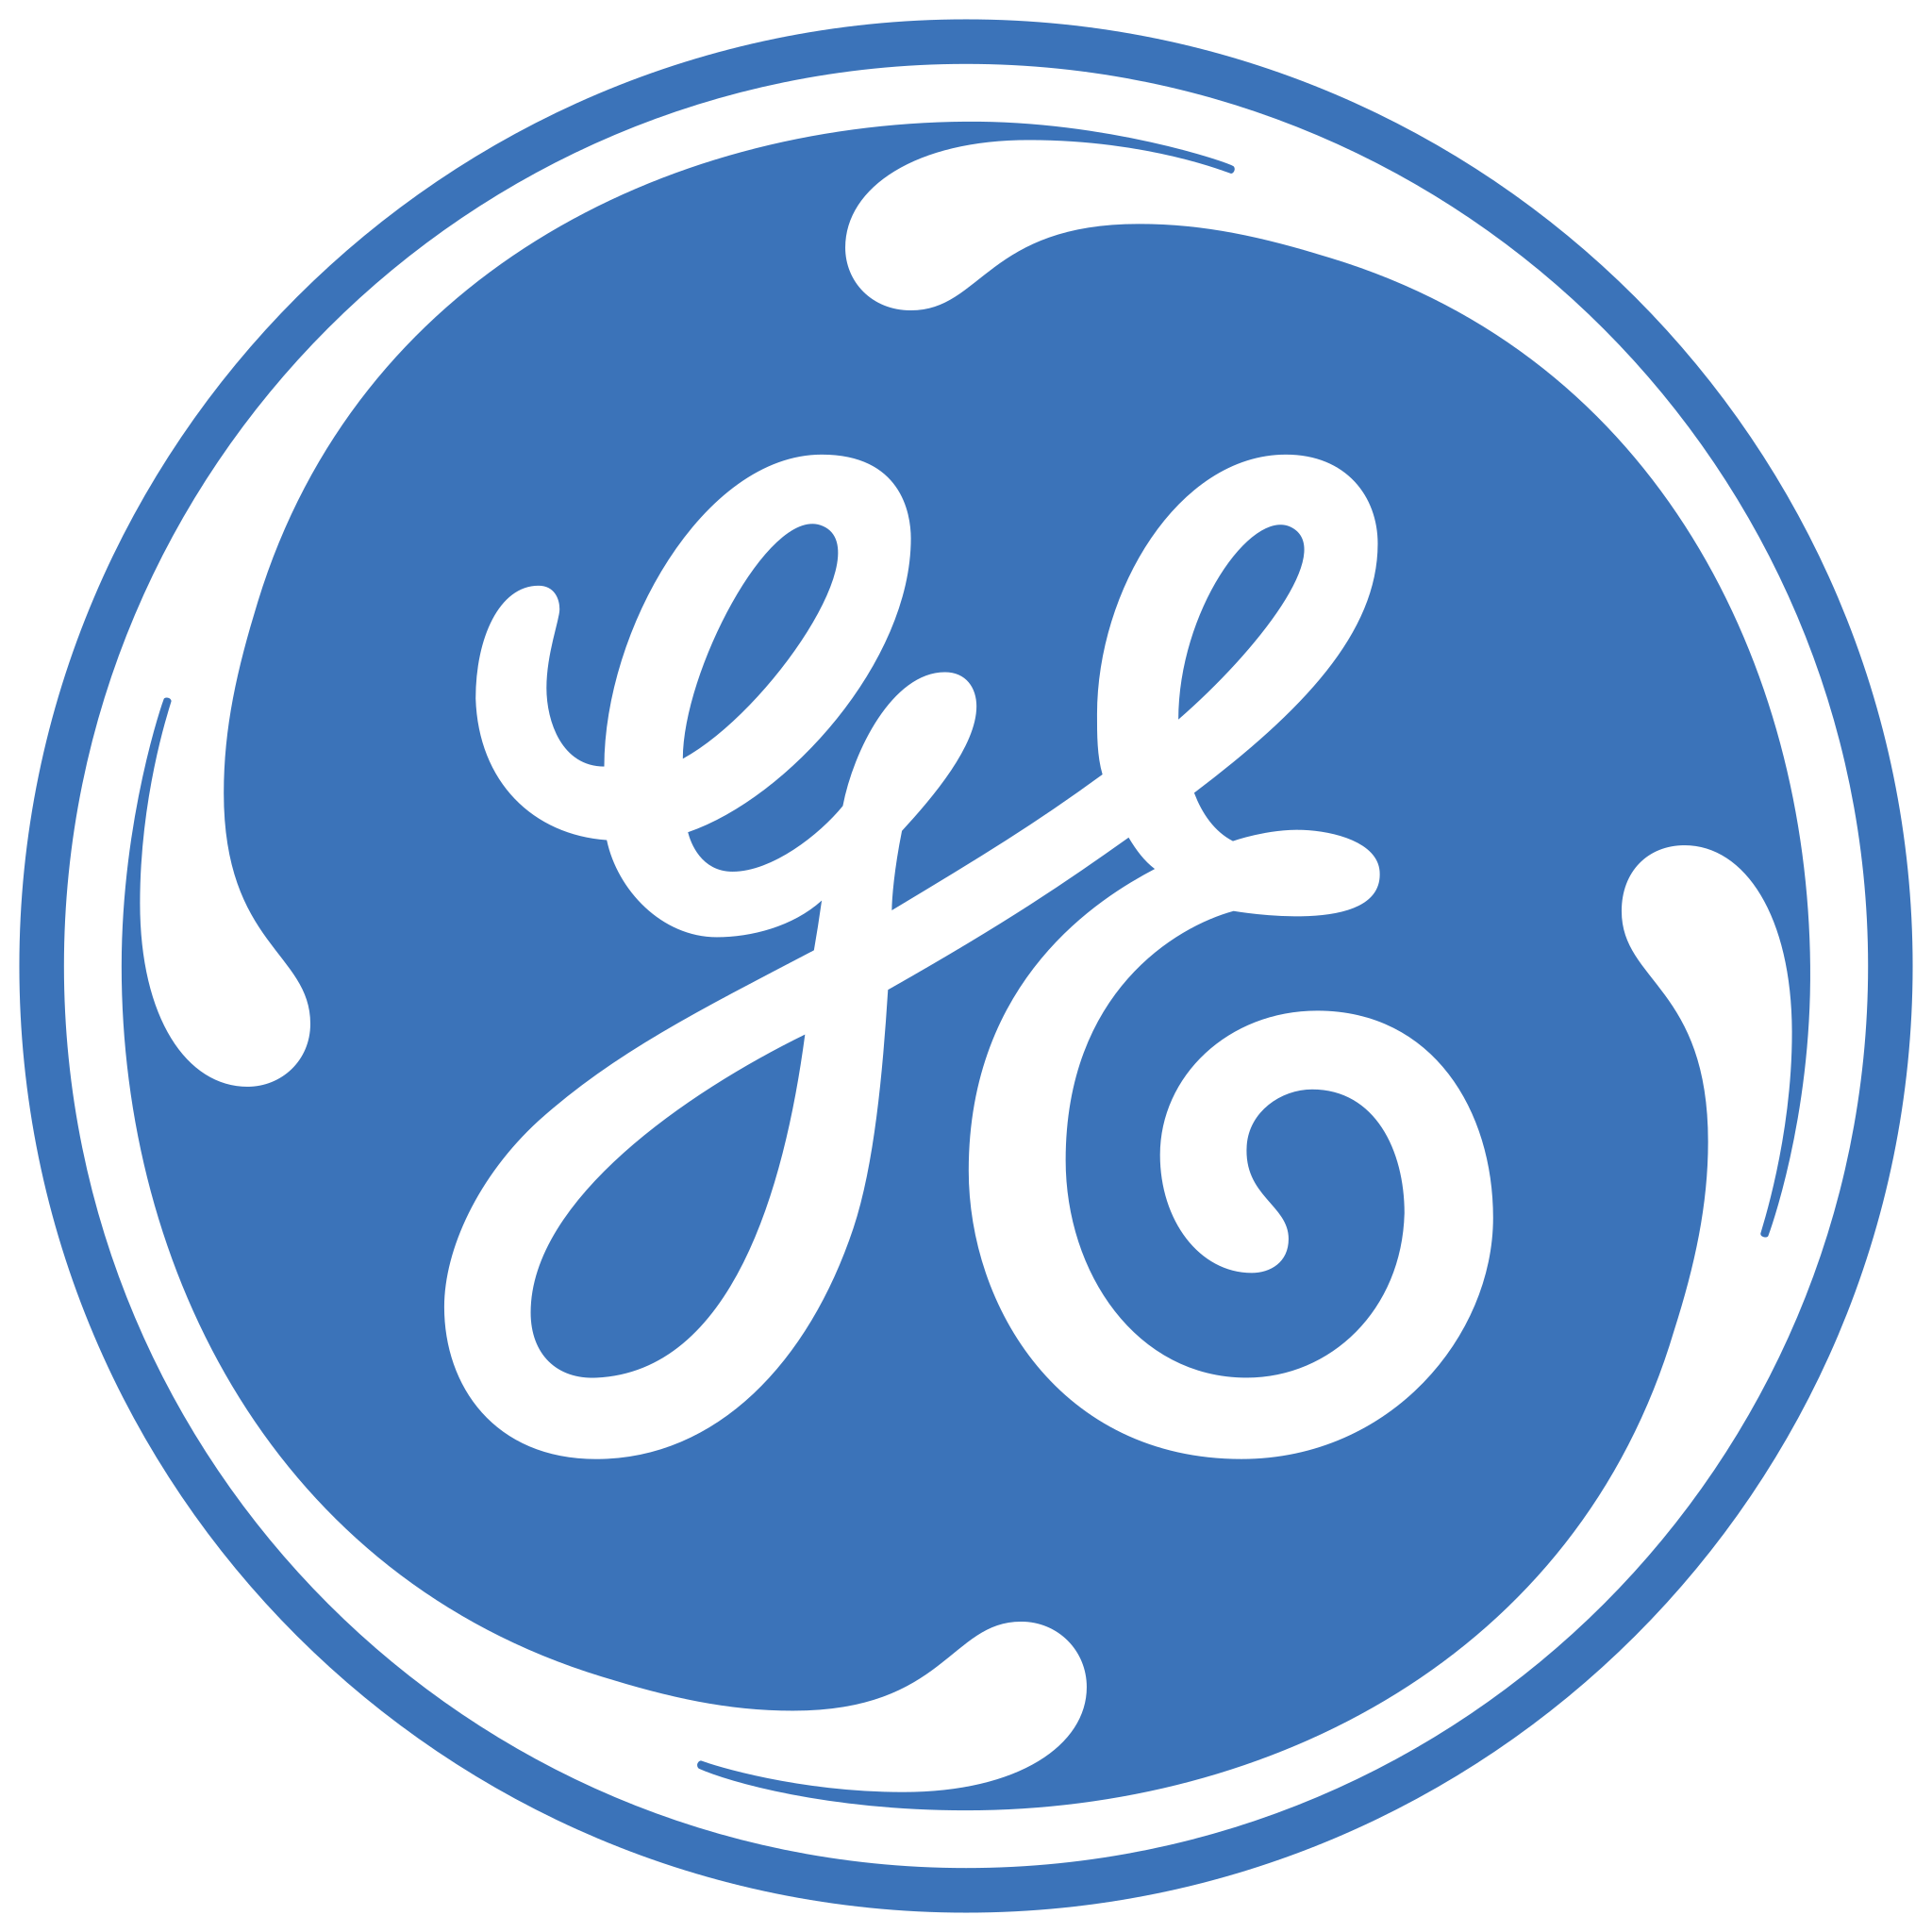 Logo of ACP Conference Sponsor General Electric.